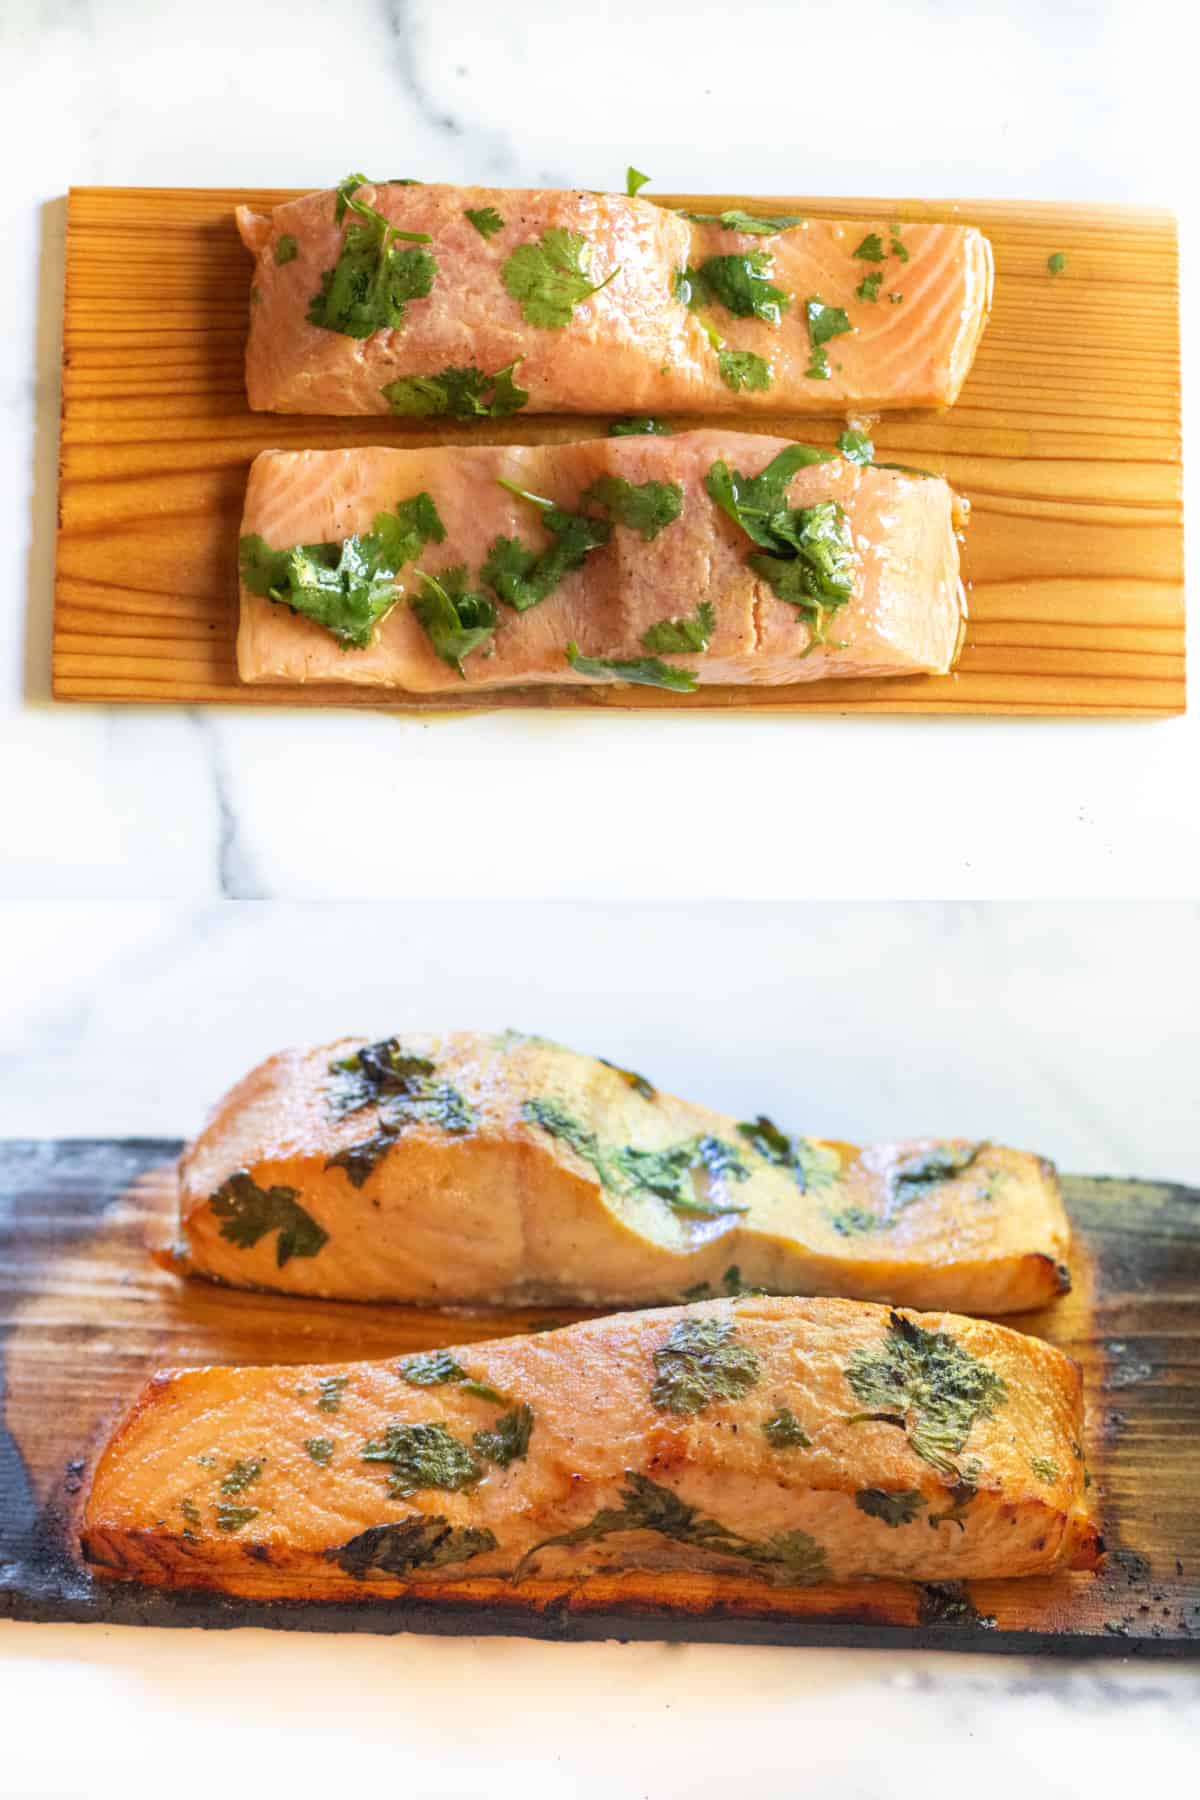 a cedar plank with two pieces of salmon with cilantro and then the salmon grilled on the plank.